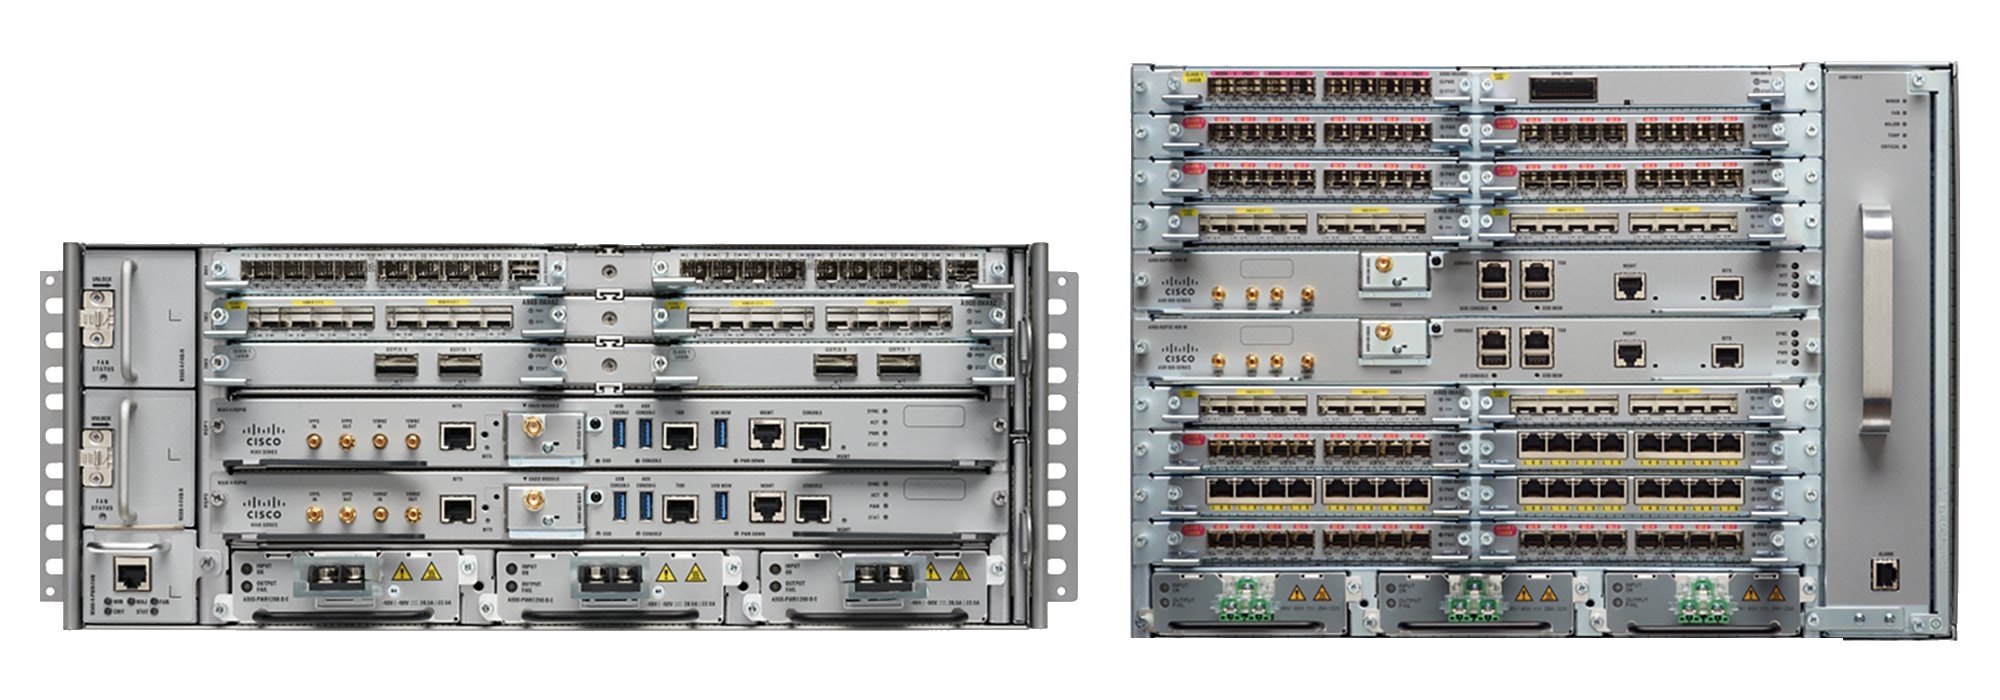 Product image of Cisco Network Convergence System 560 Series Routers